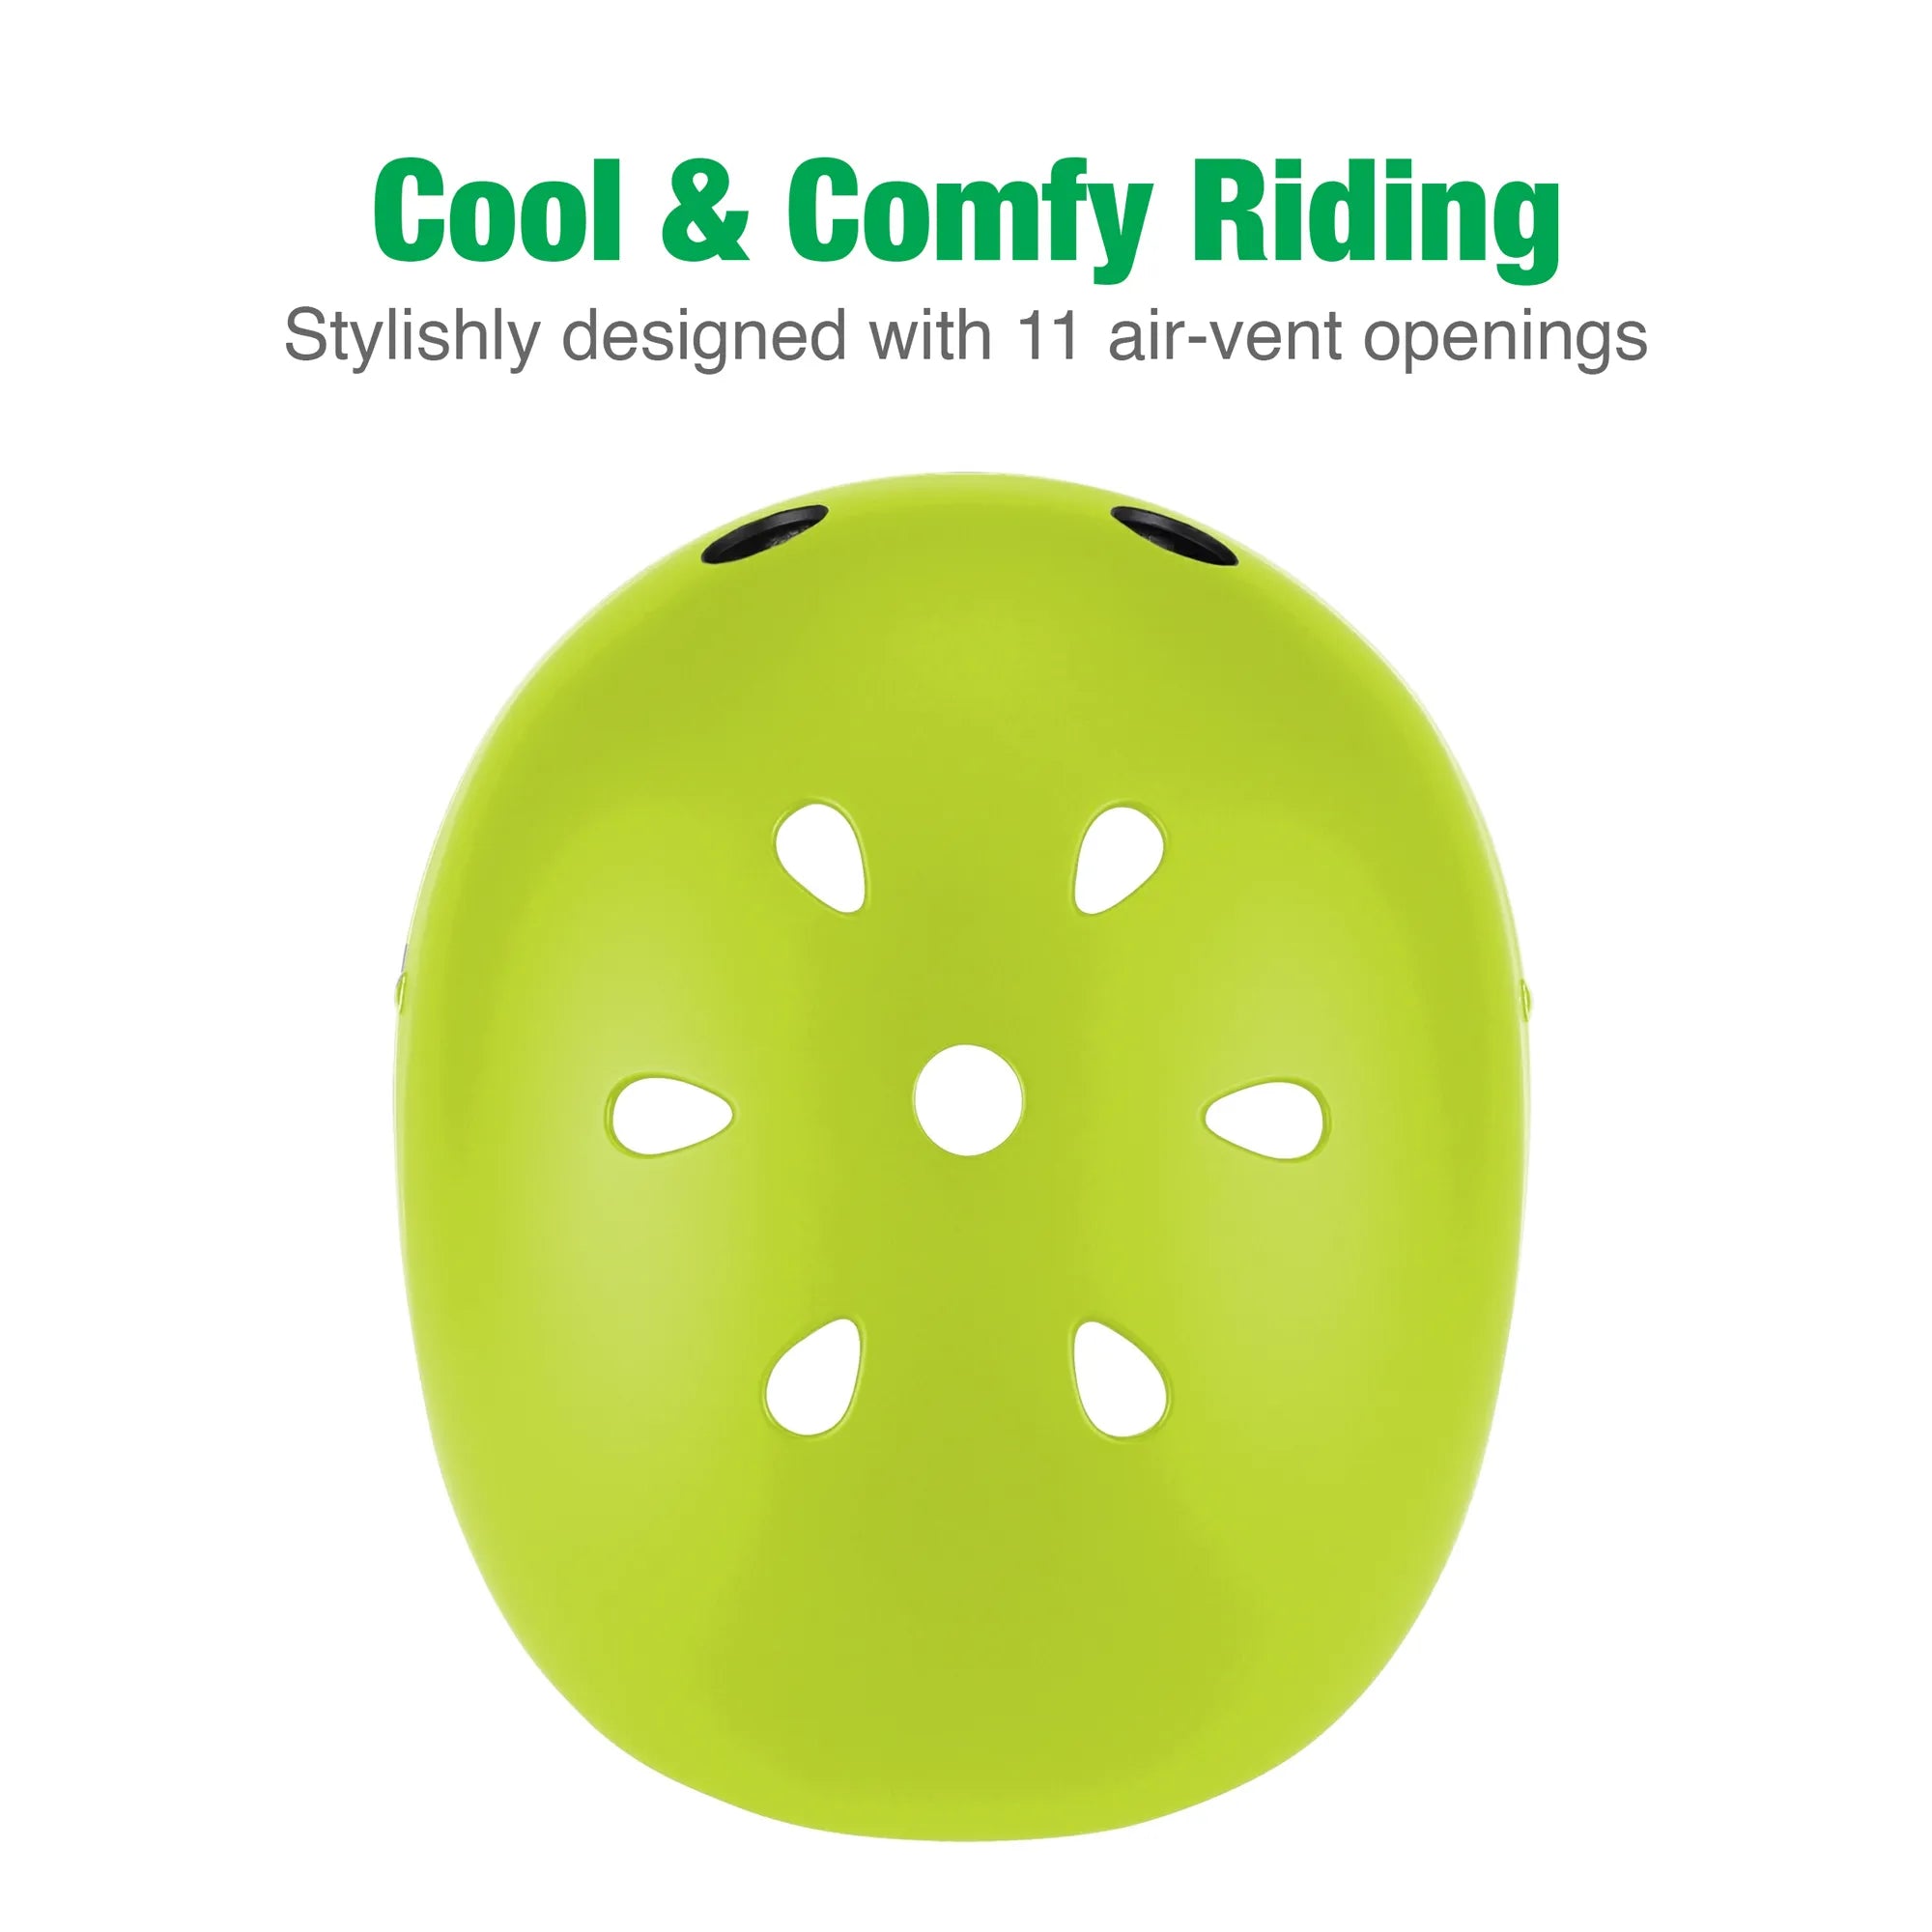 Globber Primo Helmet For Kids - Lime Green - Bikes & Scooters - Size XS-S - 48-53 cm Head Size - Brown's Hobby & Game